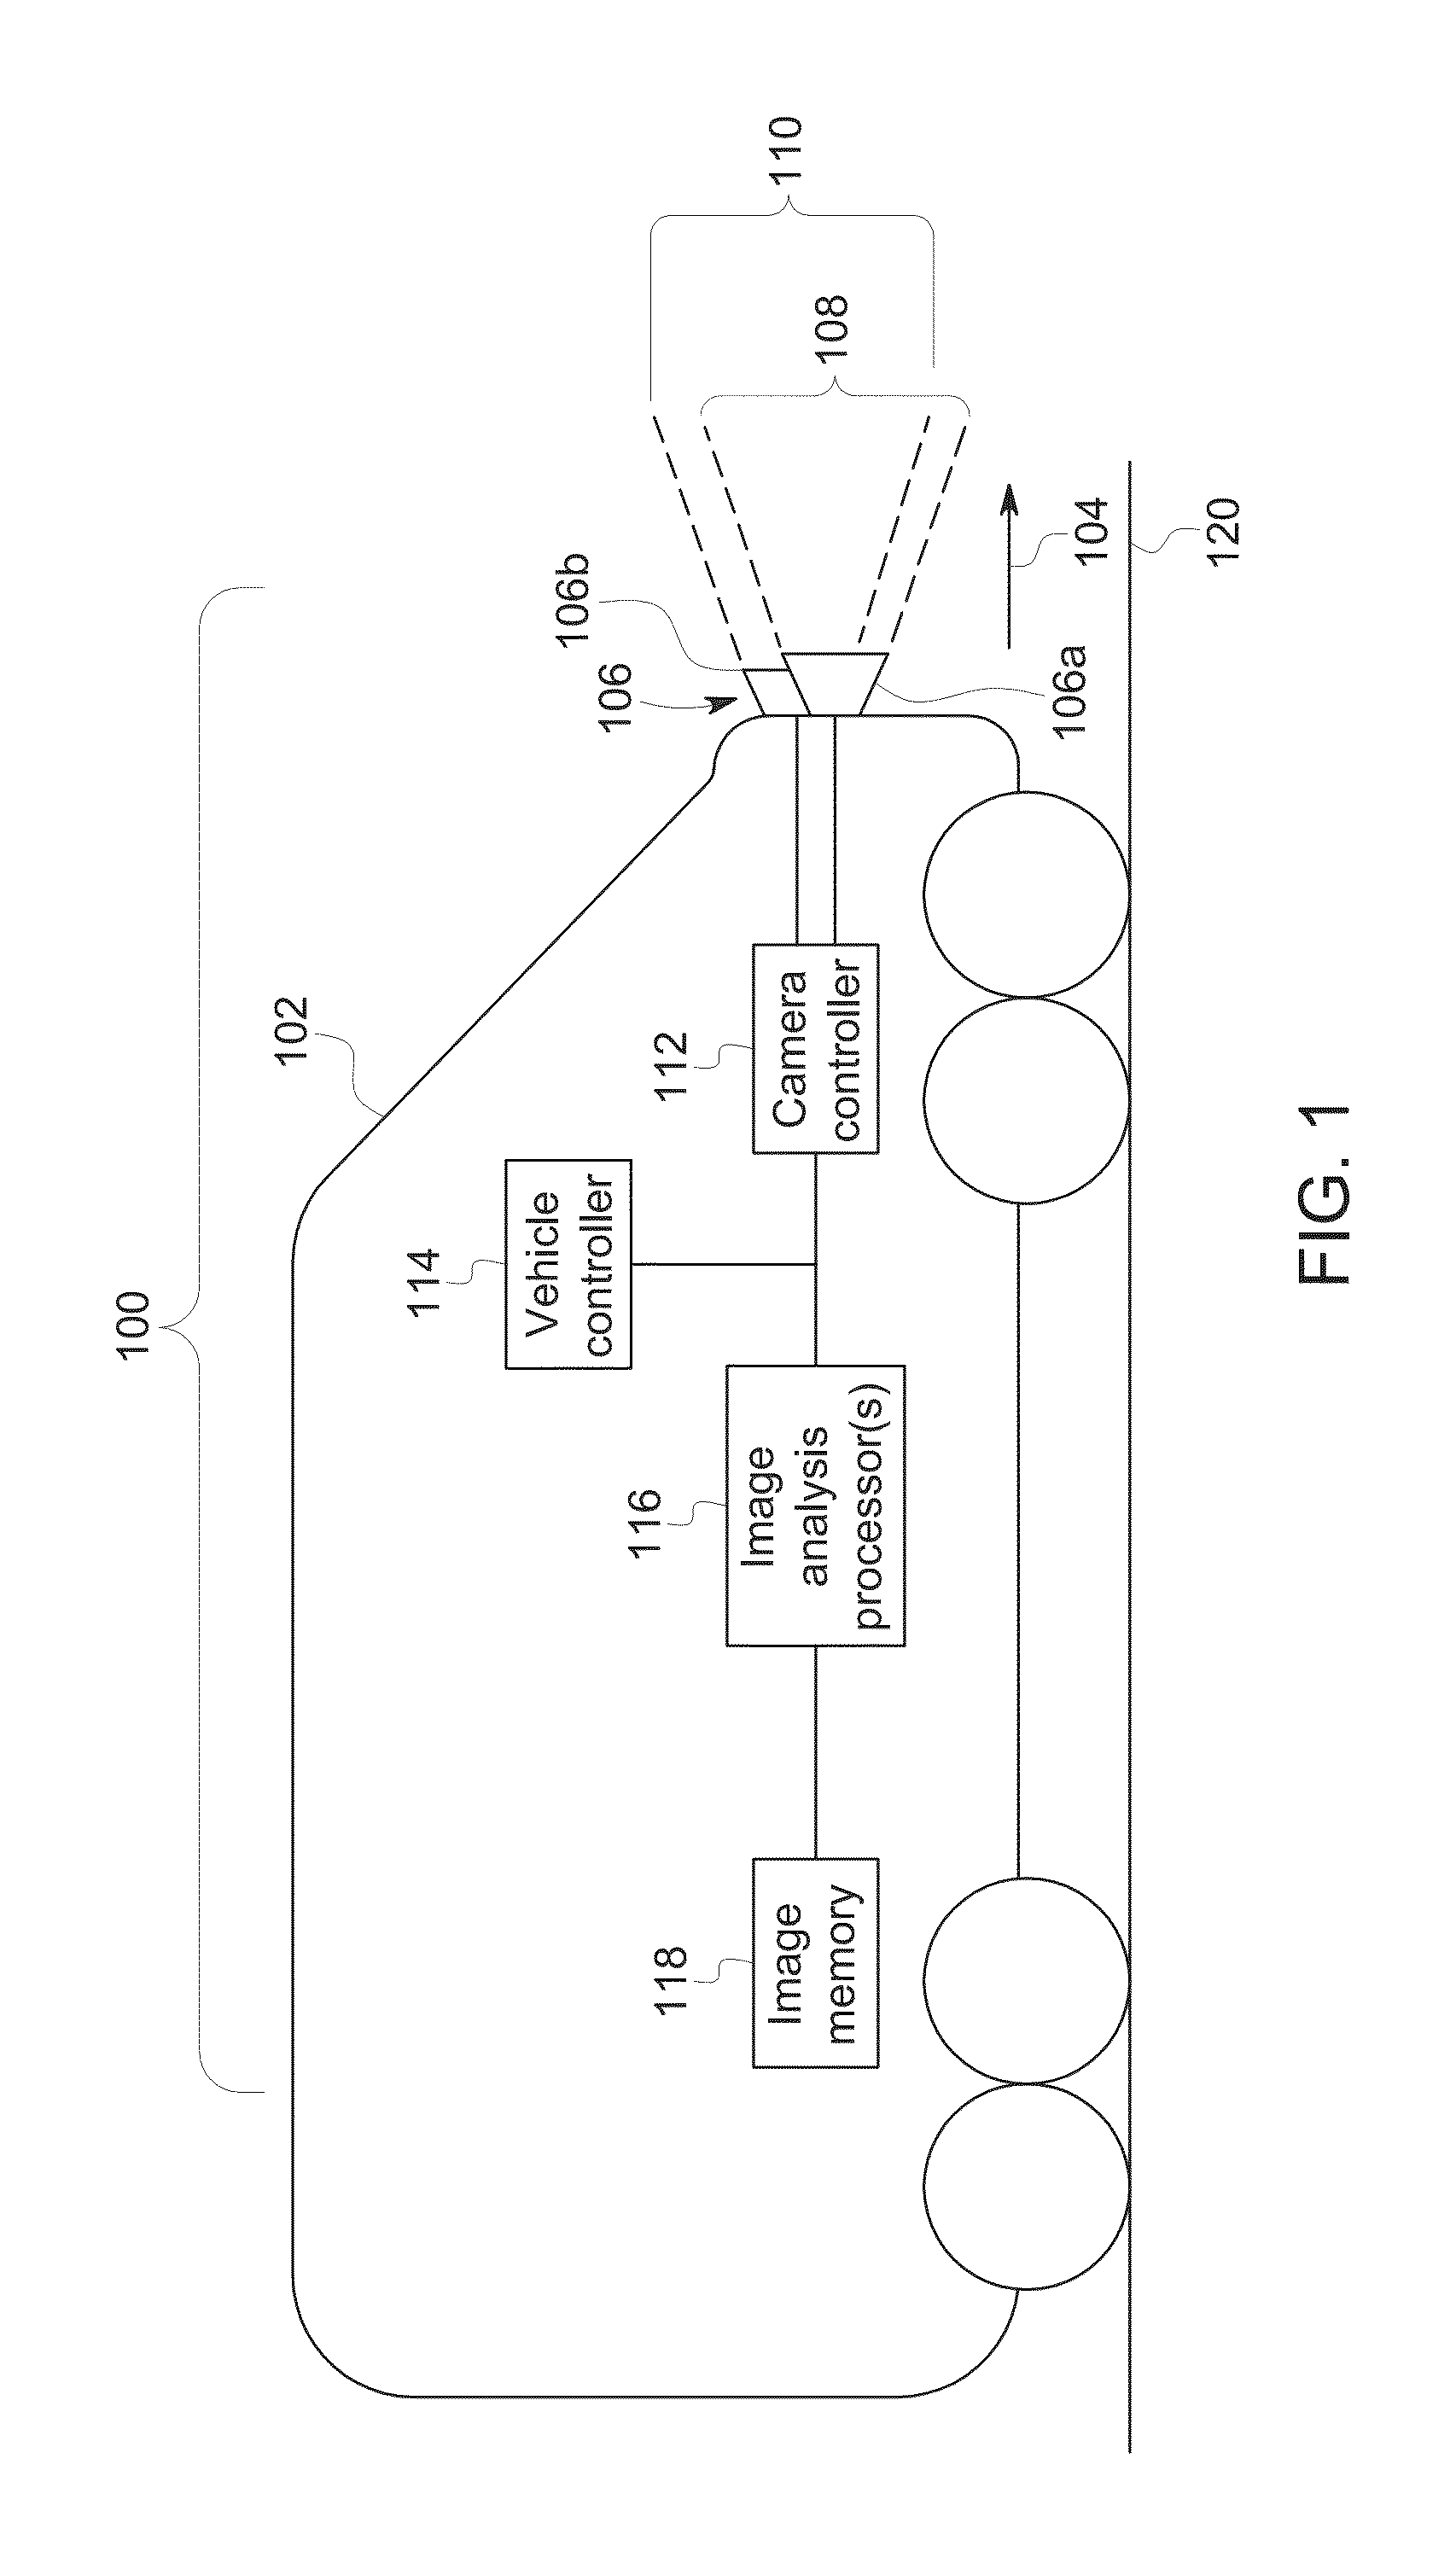 Optical route examination system and method